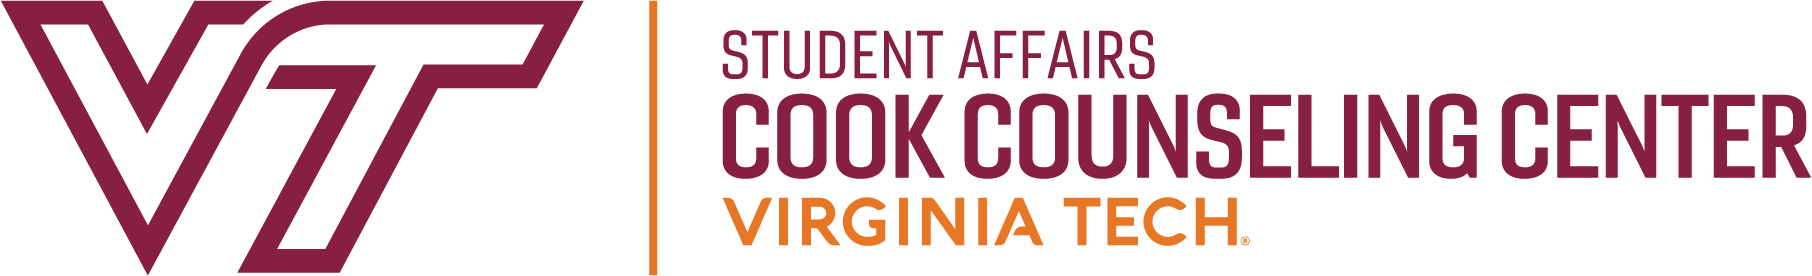 Cook Counseling Center logo